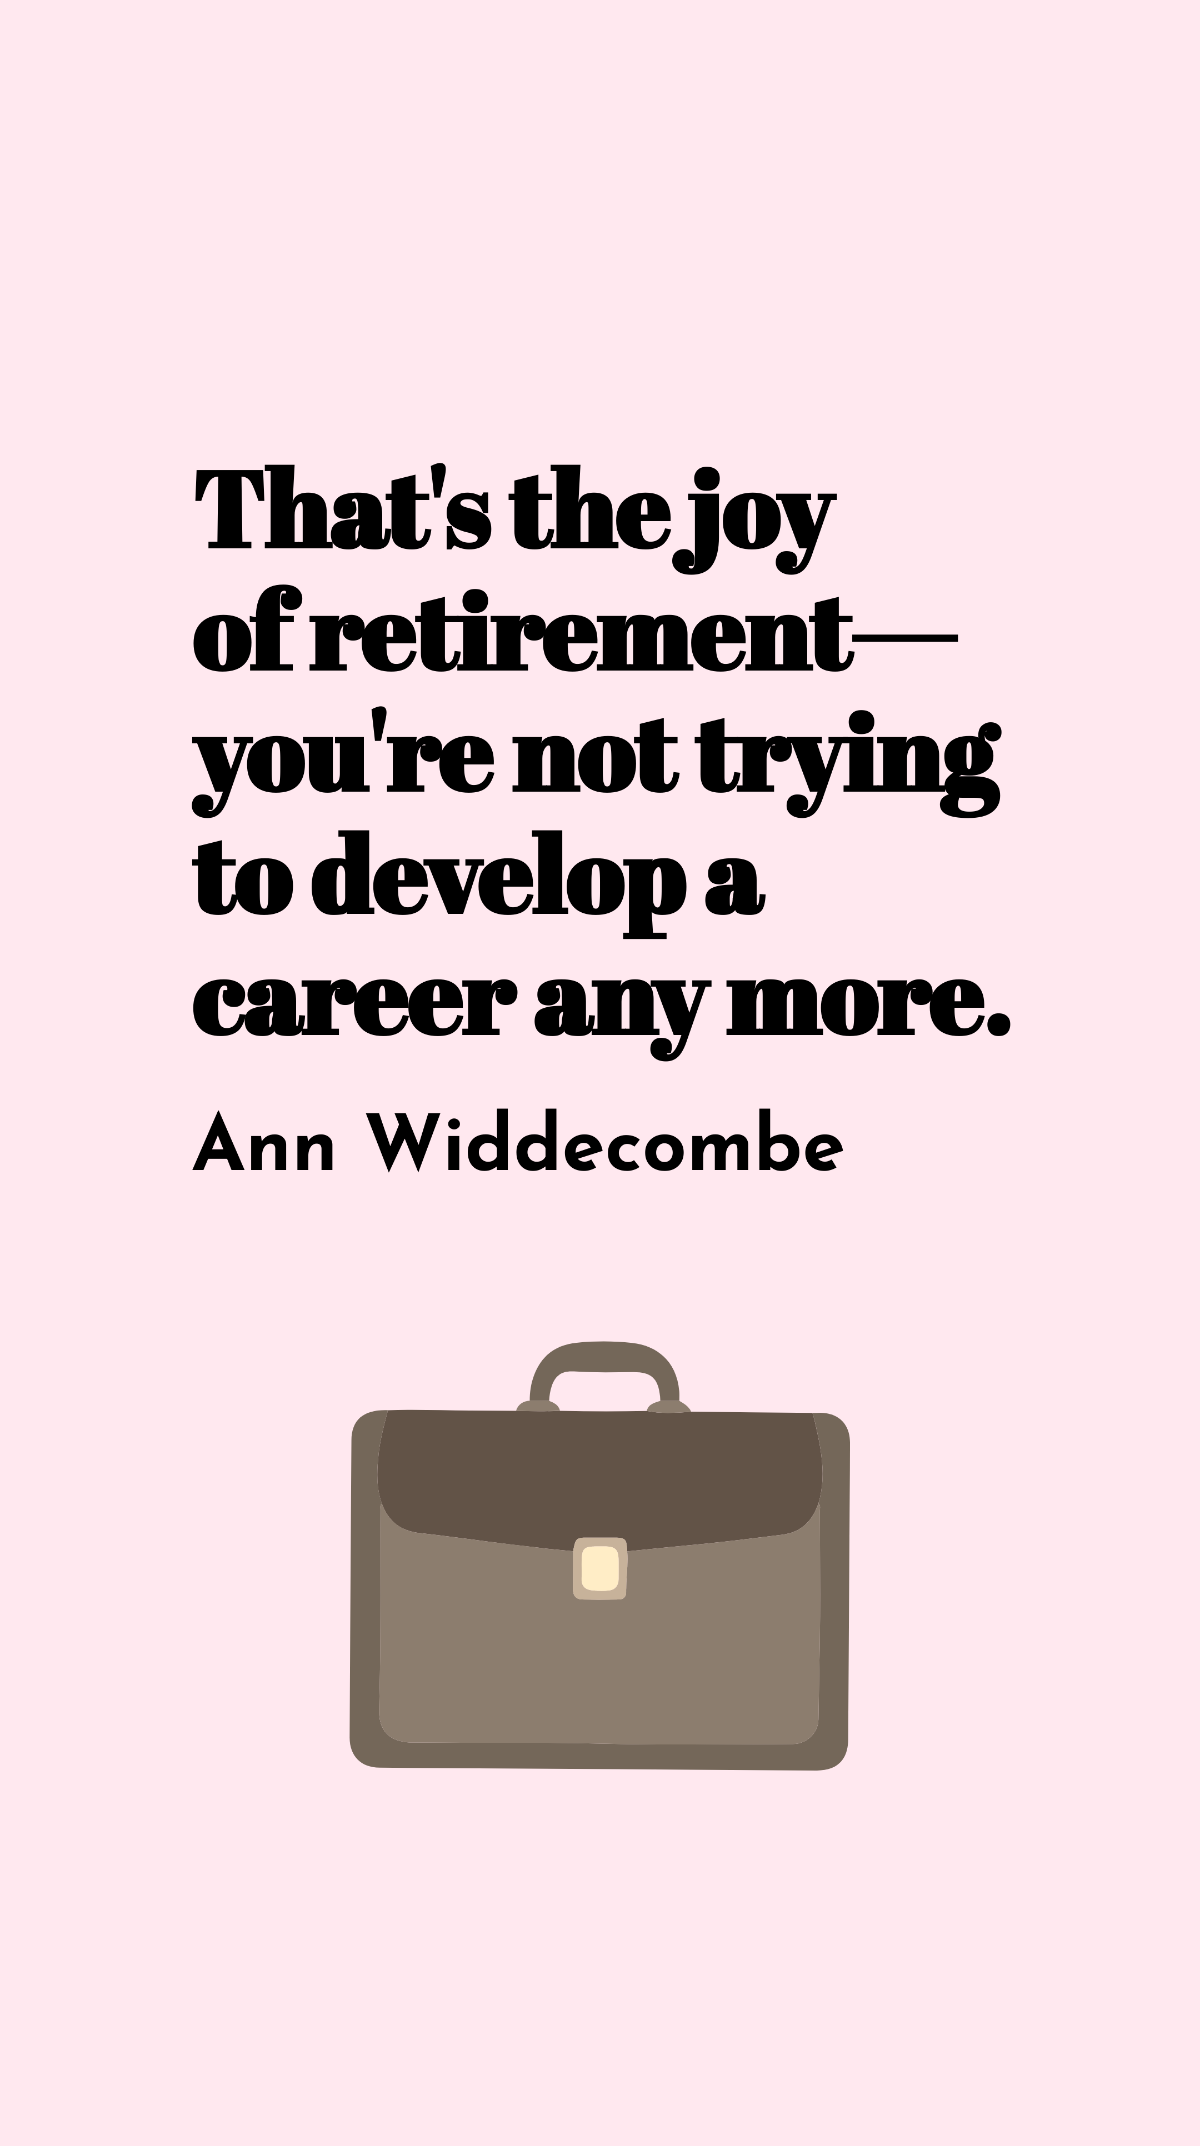 Free Ann Widdecombe - That's the joy of retirement - you're not trying to develop a career any more. Template